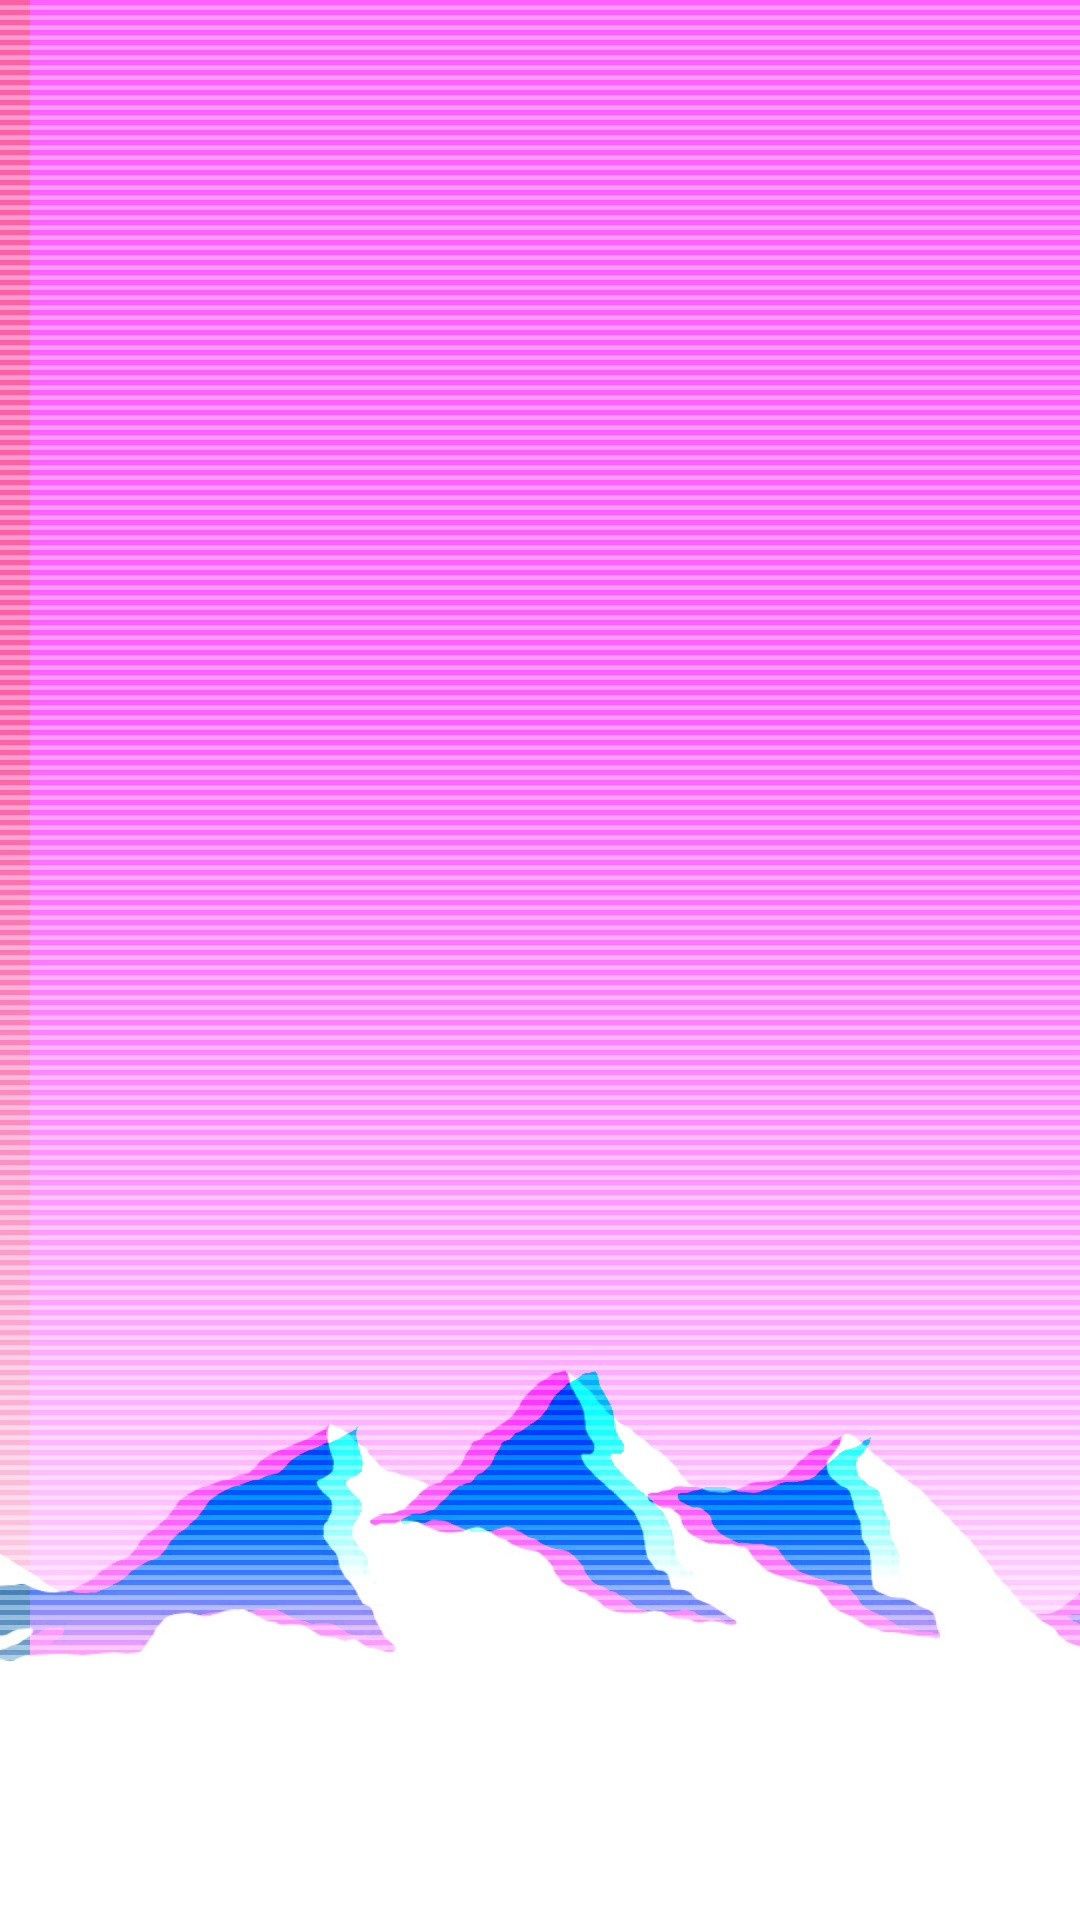 AESTHETIC VAPORWAVE PHONE WALLPAPER COLLECTION 192